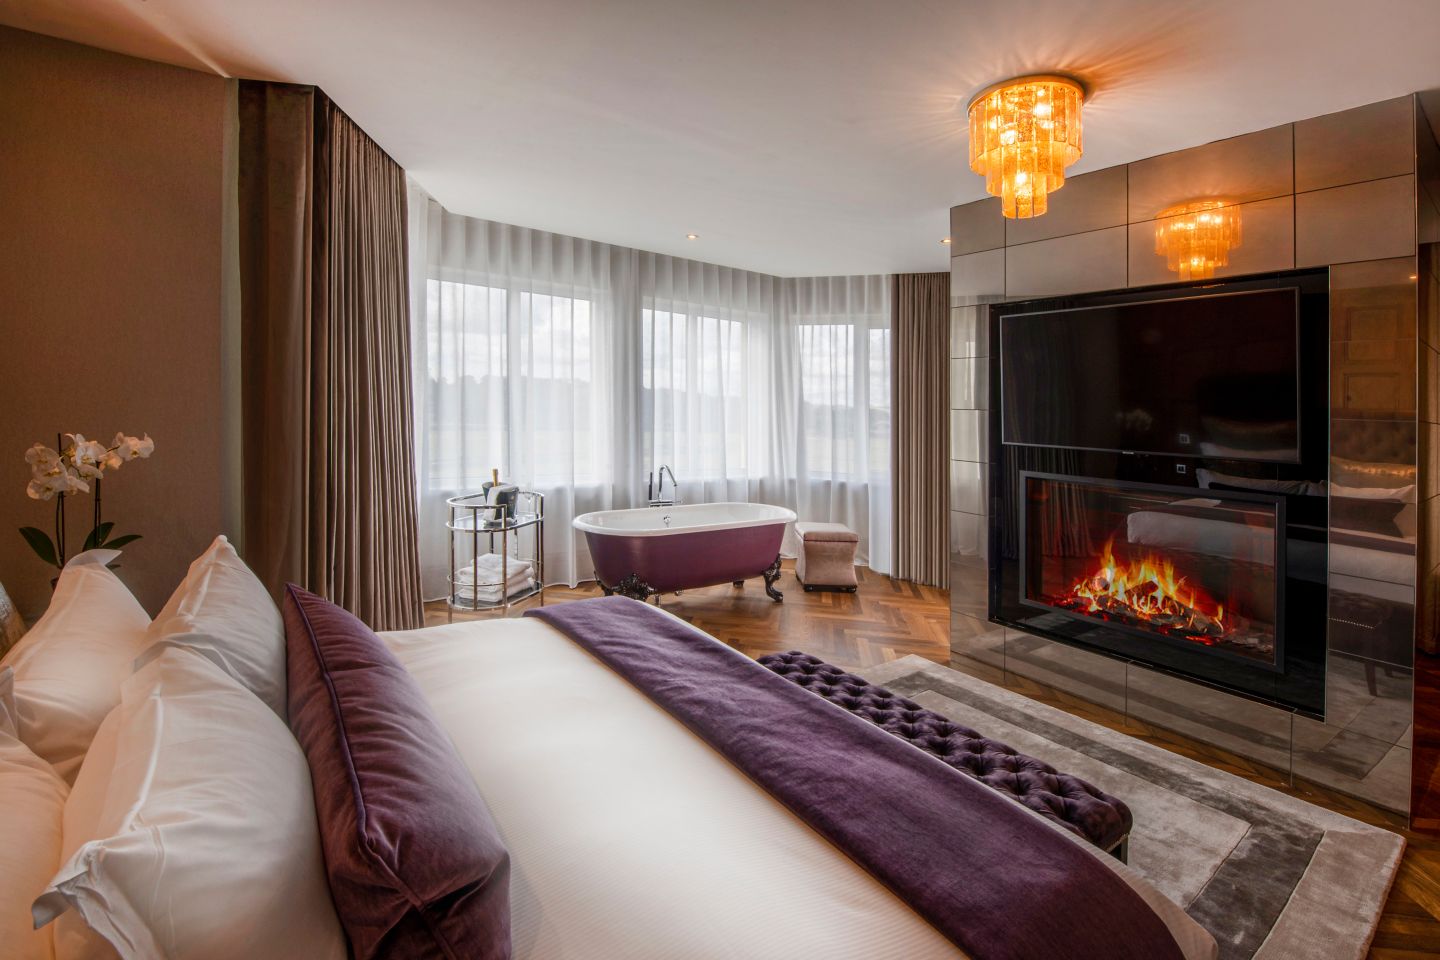 The Penthouse suite bedroom at the Old Course Hotel, St Andrews, with a fireplace and freestanding bath